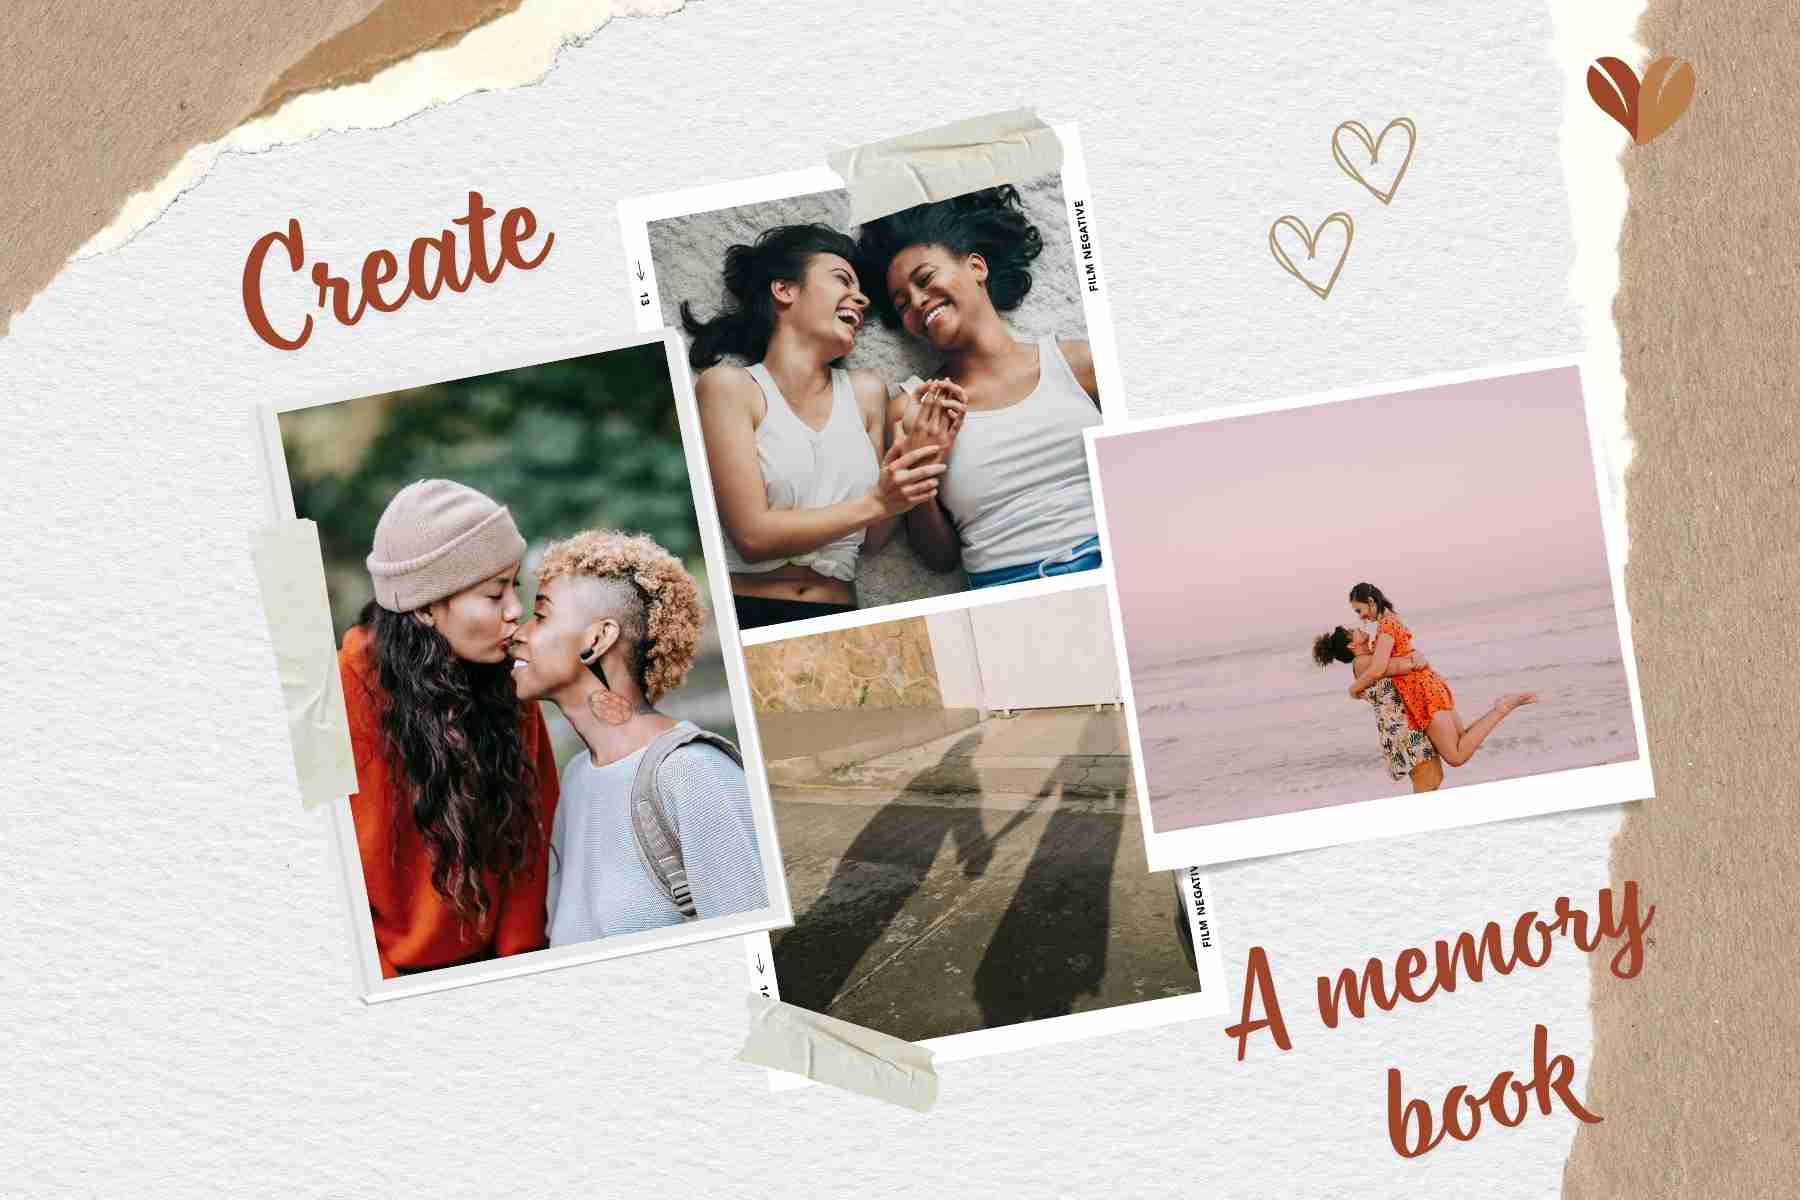 A memory book is a heartfelt way to celebrate their love story.